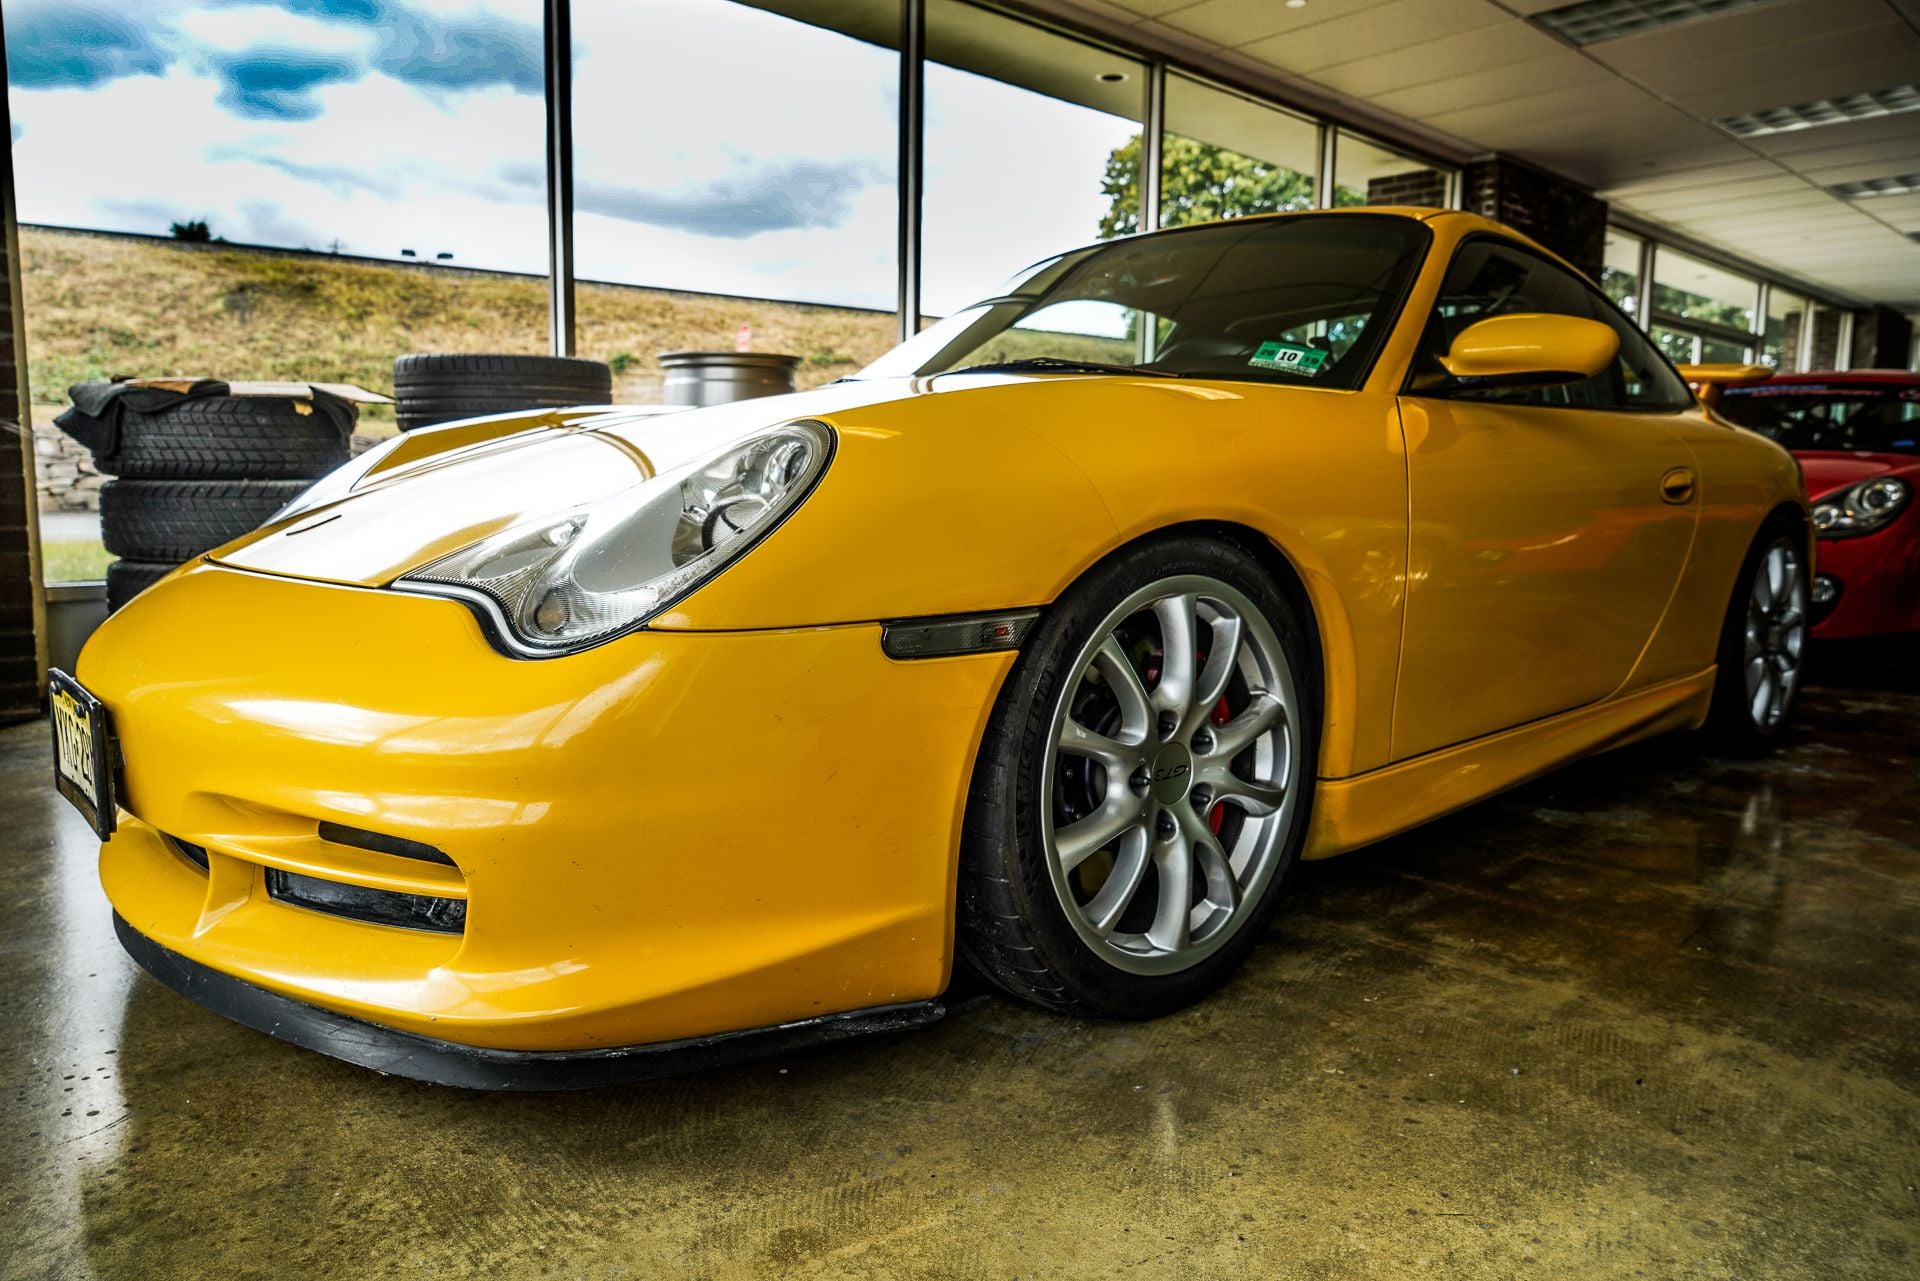 2004 Porsche GT3 - 2004 Porsche 911 GT3 - Yellow - Street w/ Track Mods - Used - VIN WP0AC29934S692516 - 44,879 Miles - 6 cyl - 2WD - Manual - Coupe - Yellow - Blauvelt, NY 10913, United States